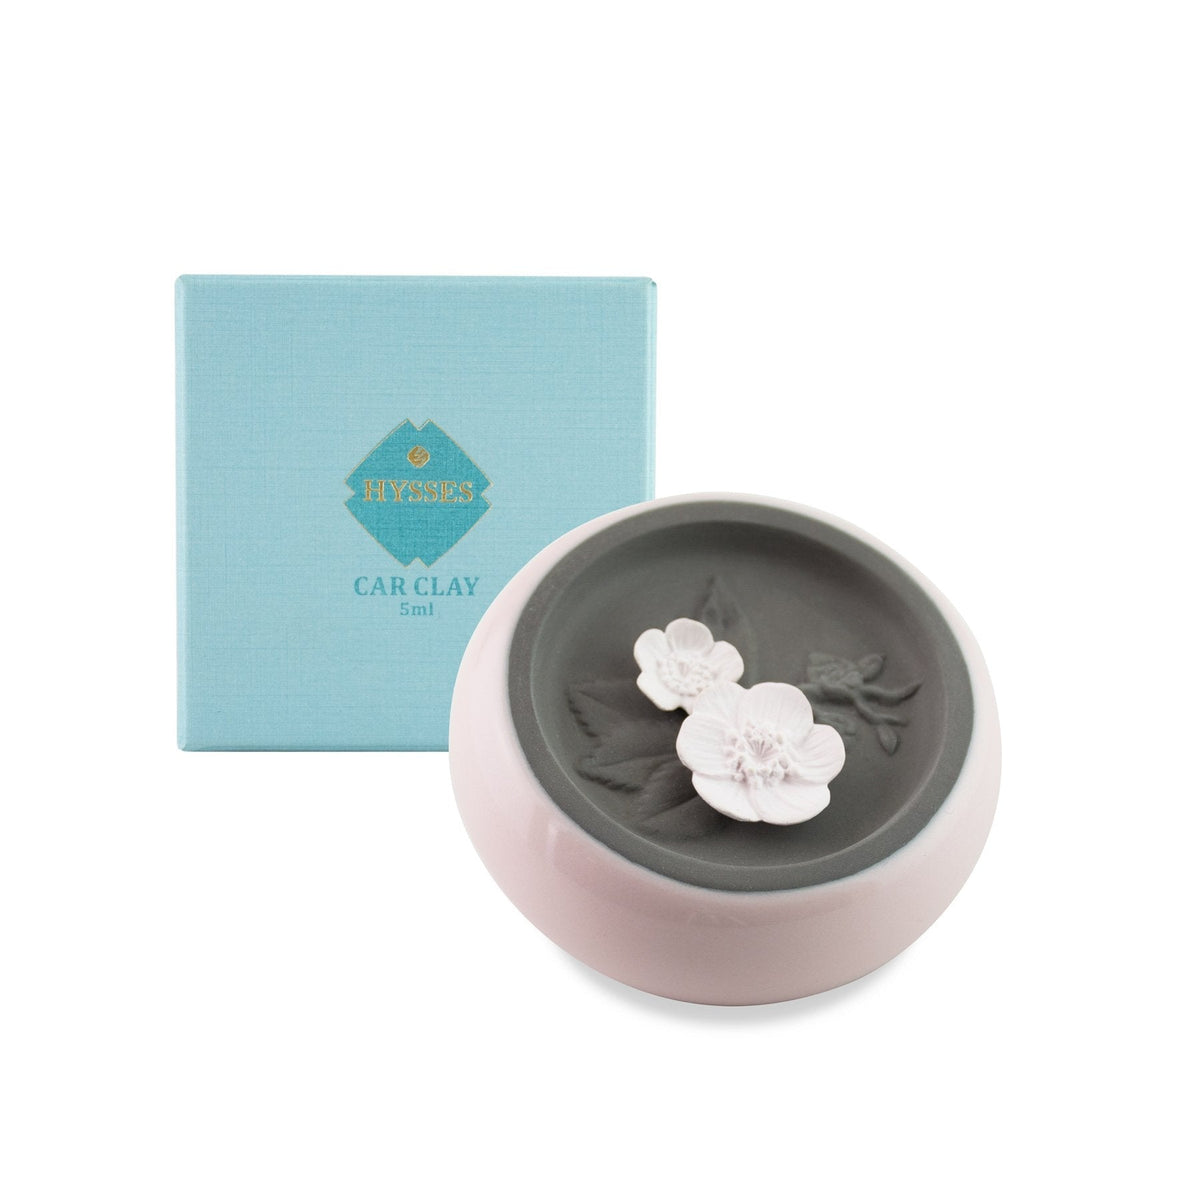 Hysses Home Scents Car Clay Diffuser Cherry Blossom